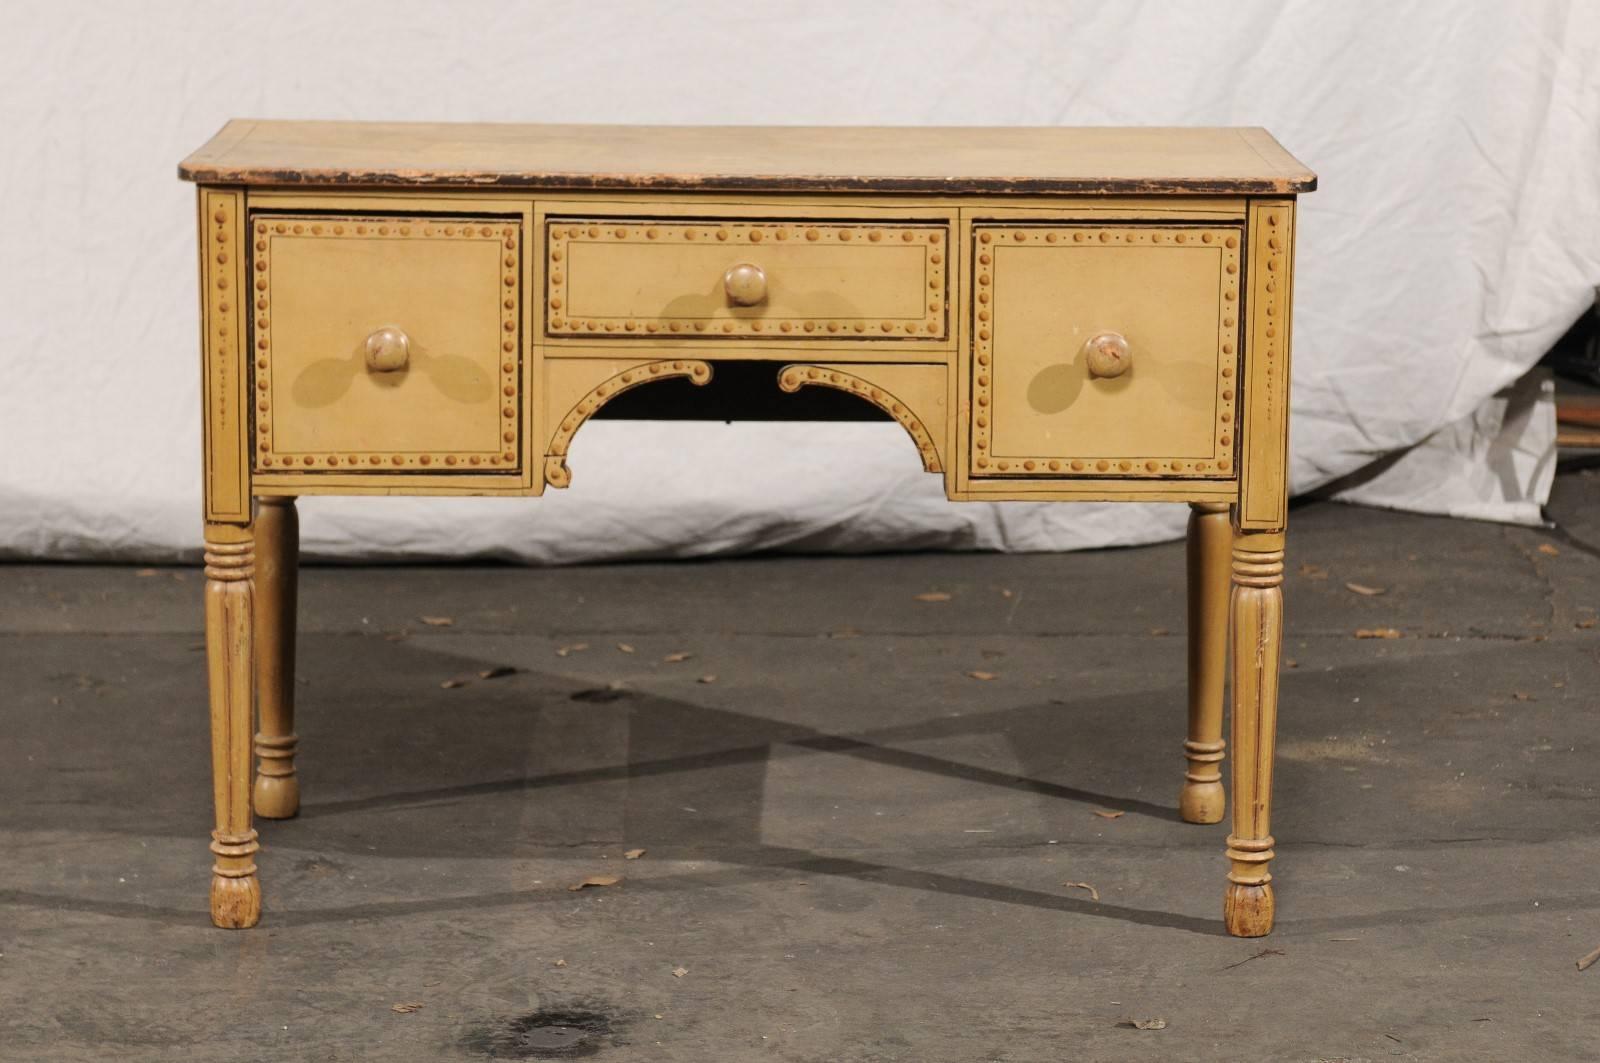 19th century English Regency style cream painted table with drawers, great surface decoration.